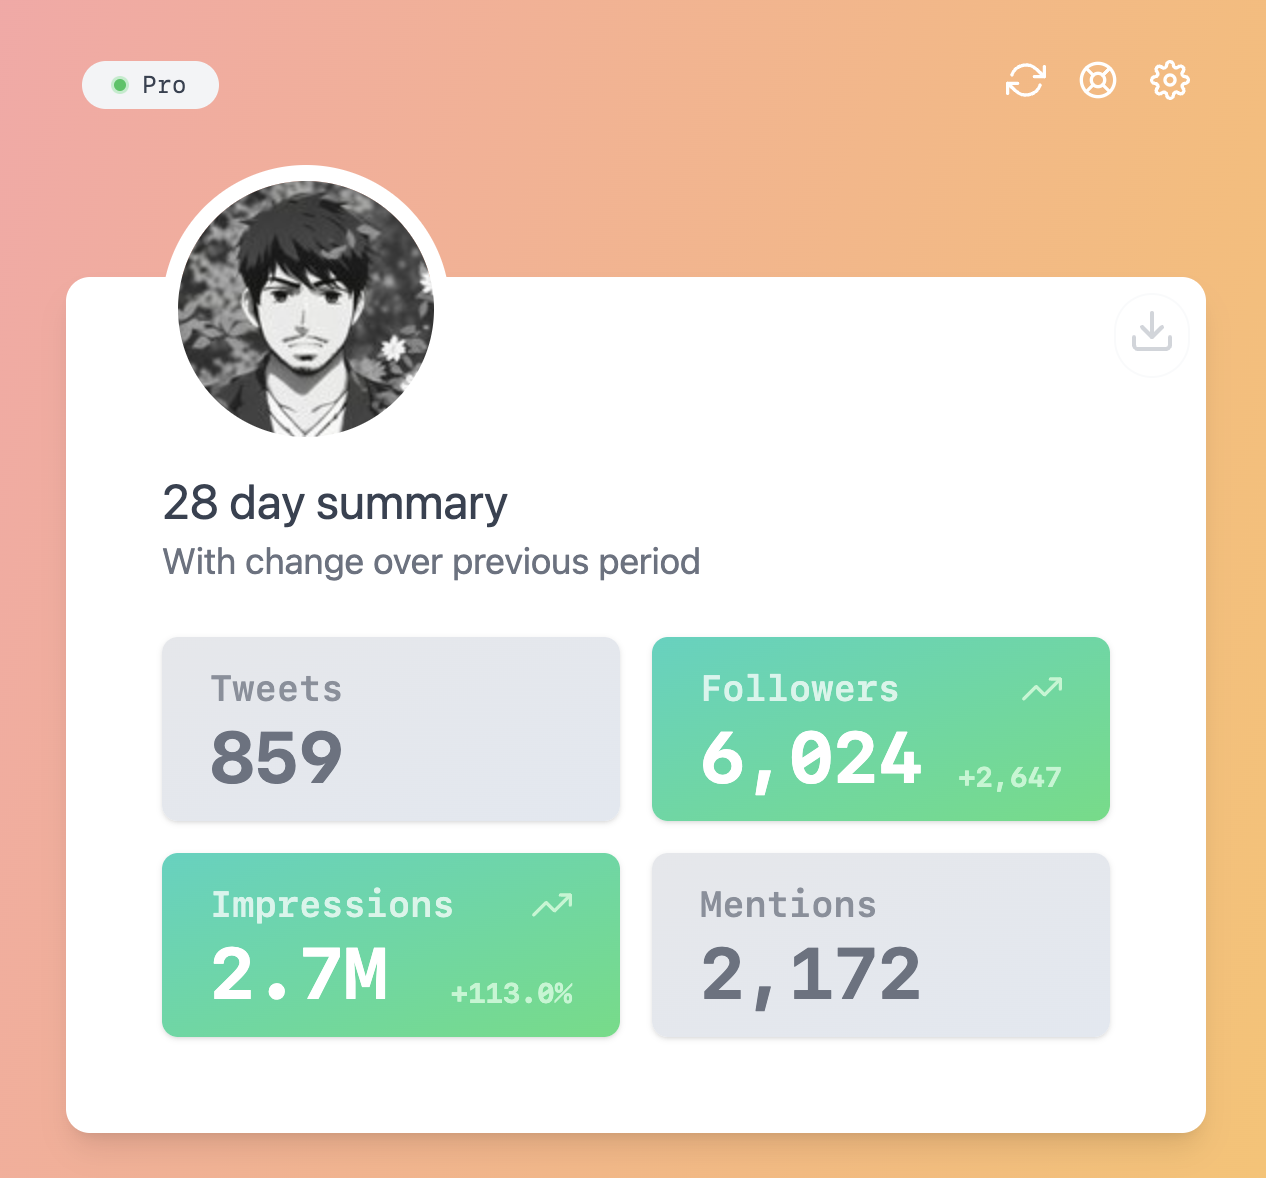 Twitter account stats